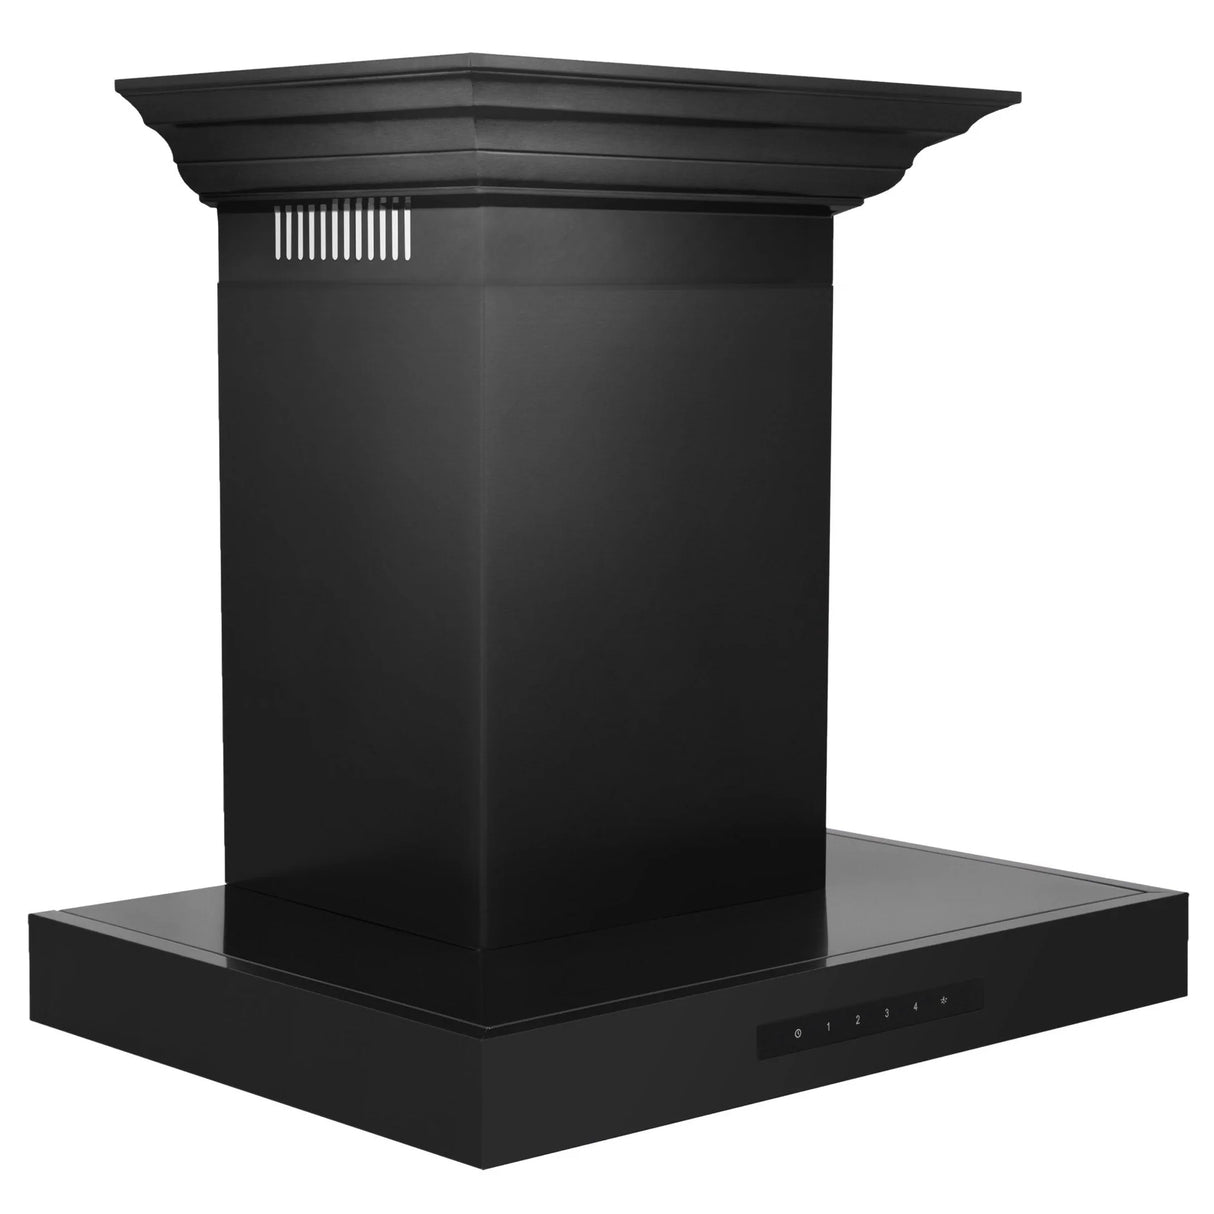 ZLINE 36" Convertible Vent Wall Mount Range Hood in Black Stainless Steel with Crown Molding